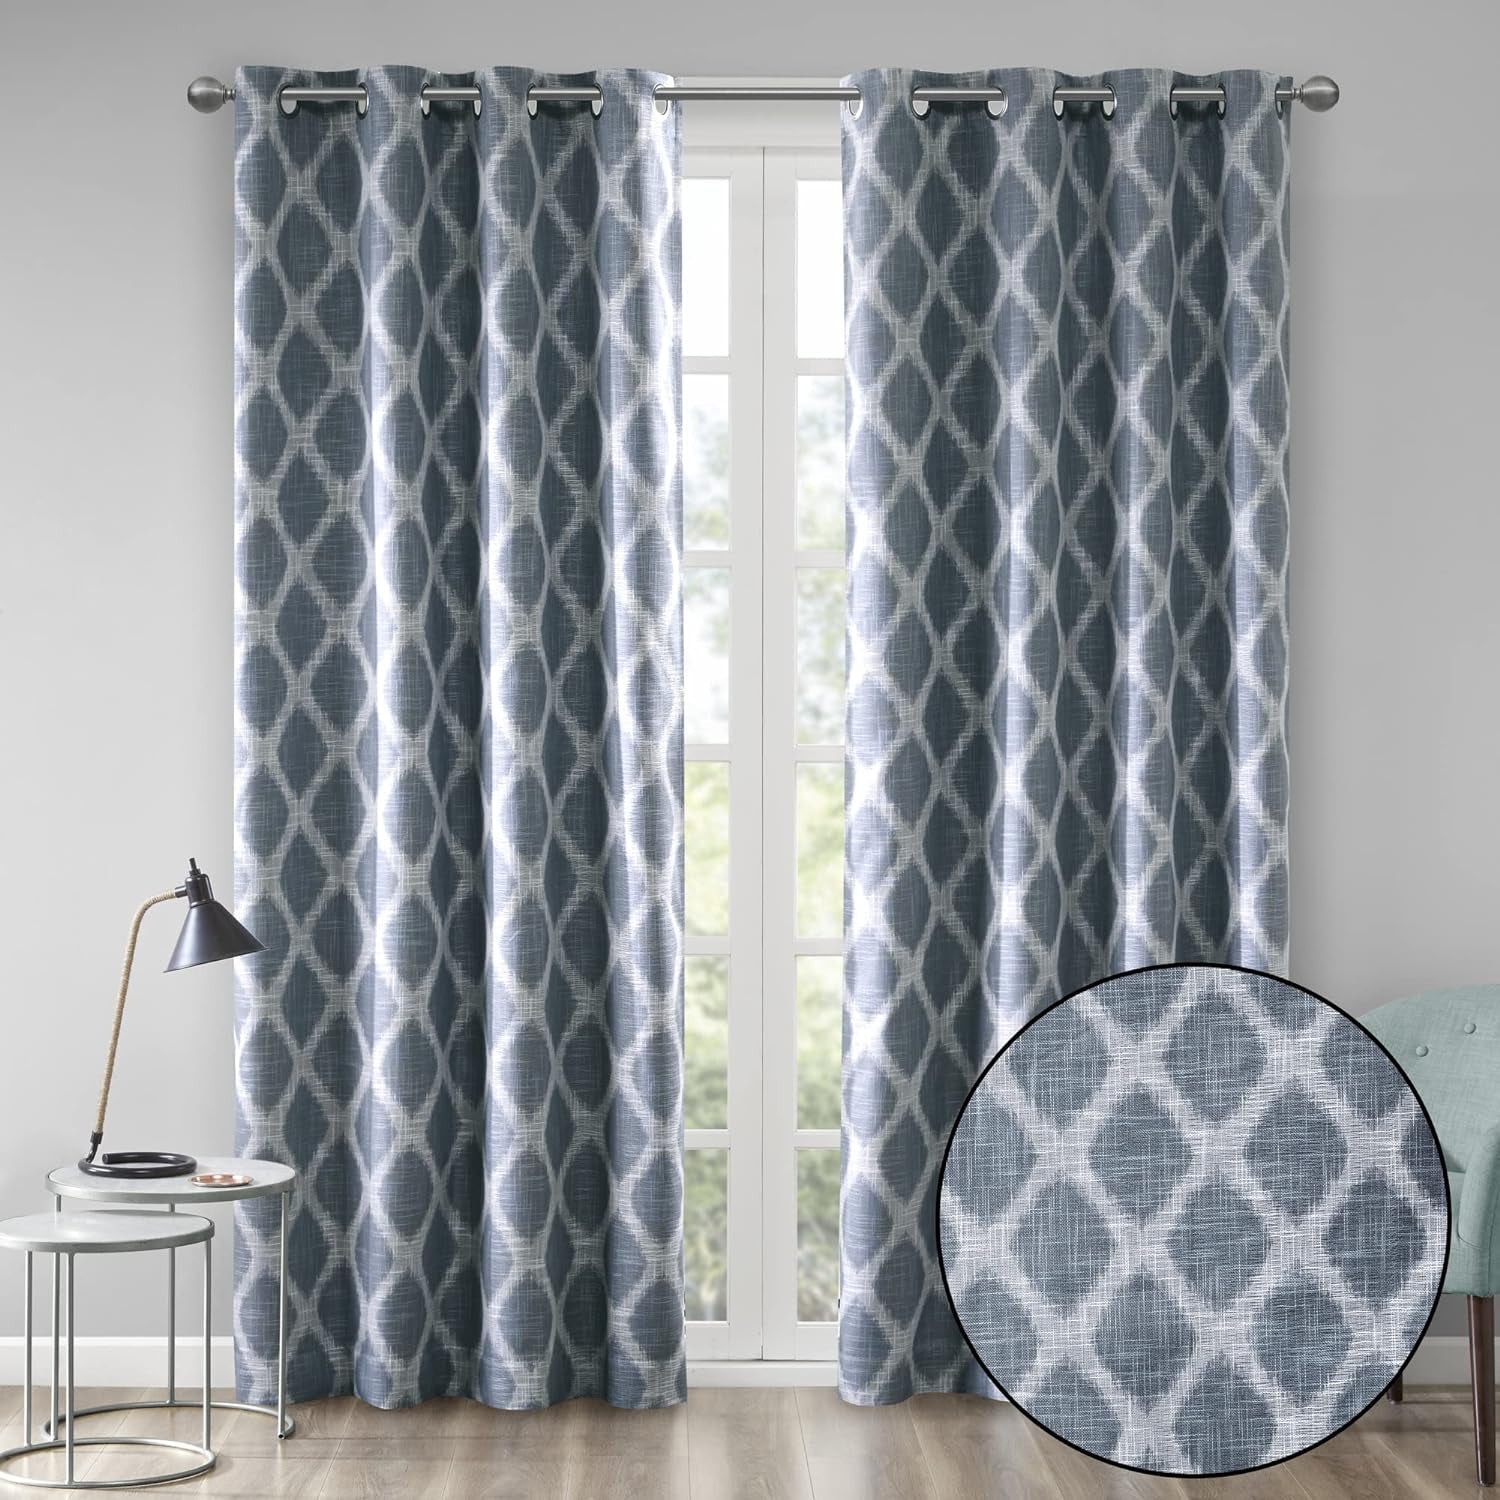 Sun Smart Blakesly Blackout Curtains Patio Window, Ikat Print, Grommet Top Living Room Decor, Living Room Decor, Thermal Insulated Light Blocking Drape for Bedroom and Apartments, 50" X 84", Grey  E&E Co. Ltd DBA JLA Home Navy 84"X50" 